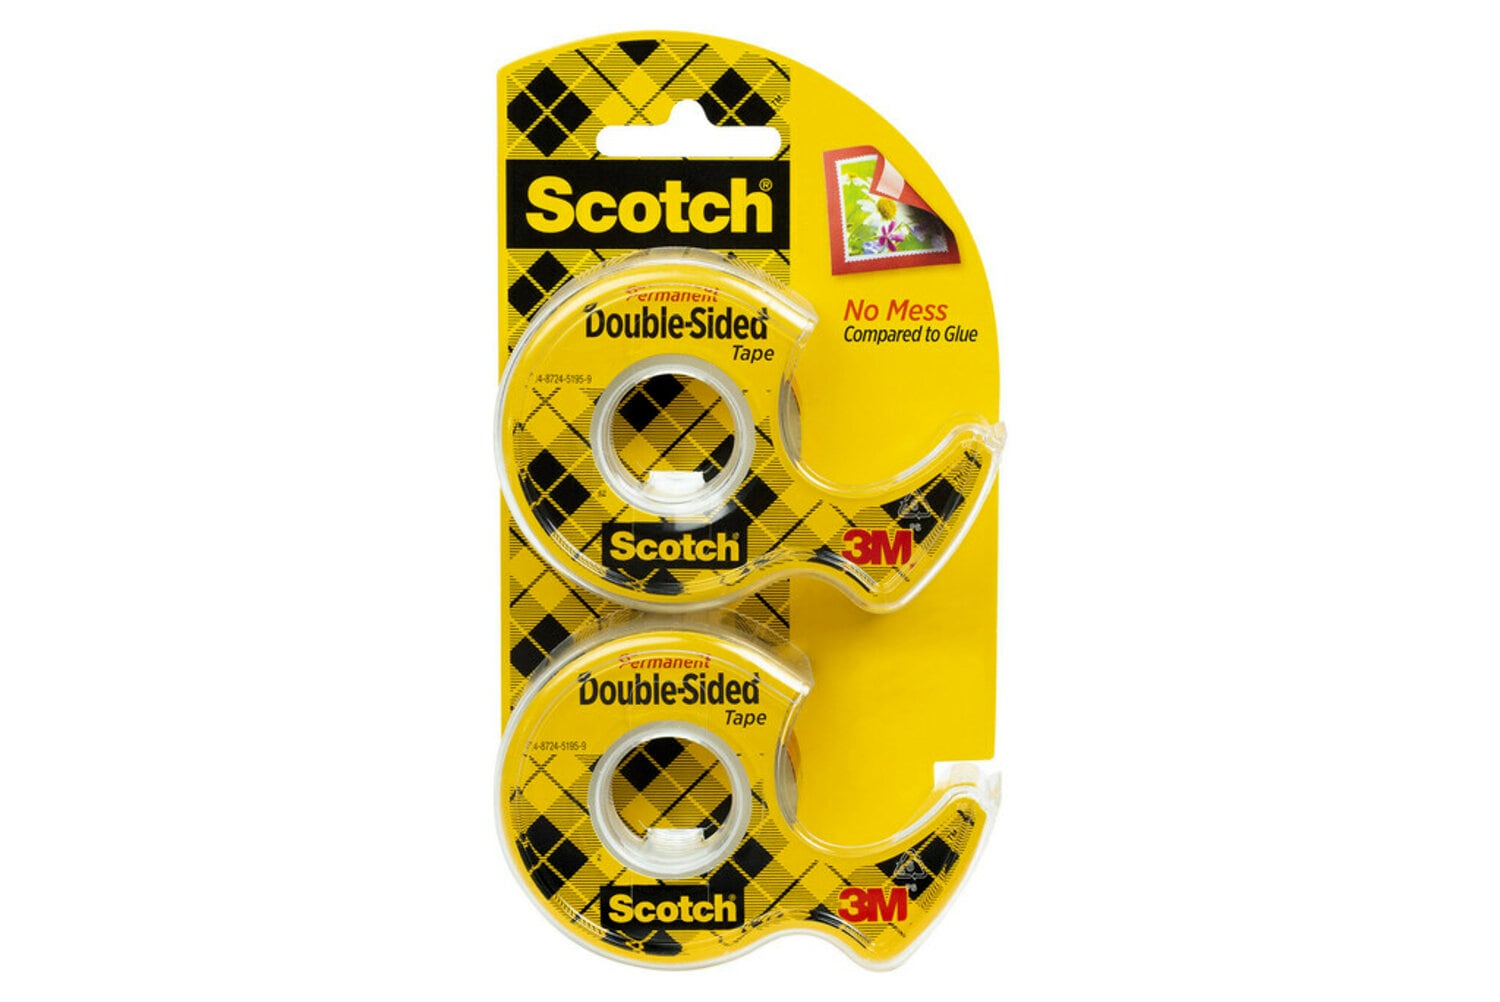 7010372559 - Scotch Double Sided Tape 137DM-2, 1/2 in x 400 in 2 Pack